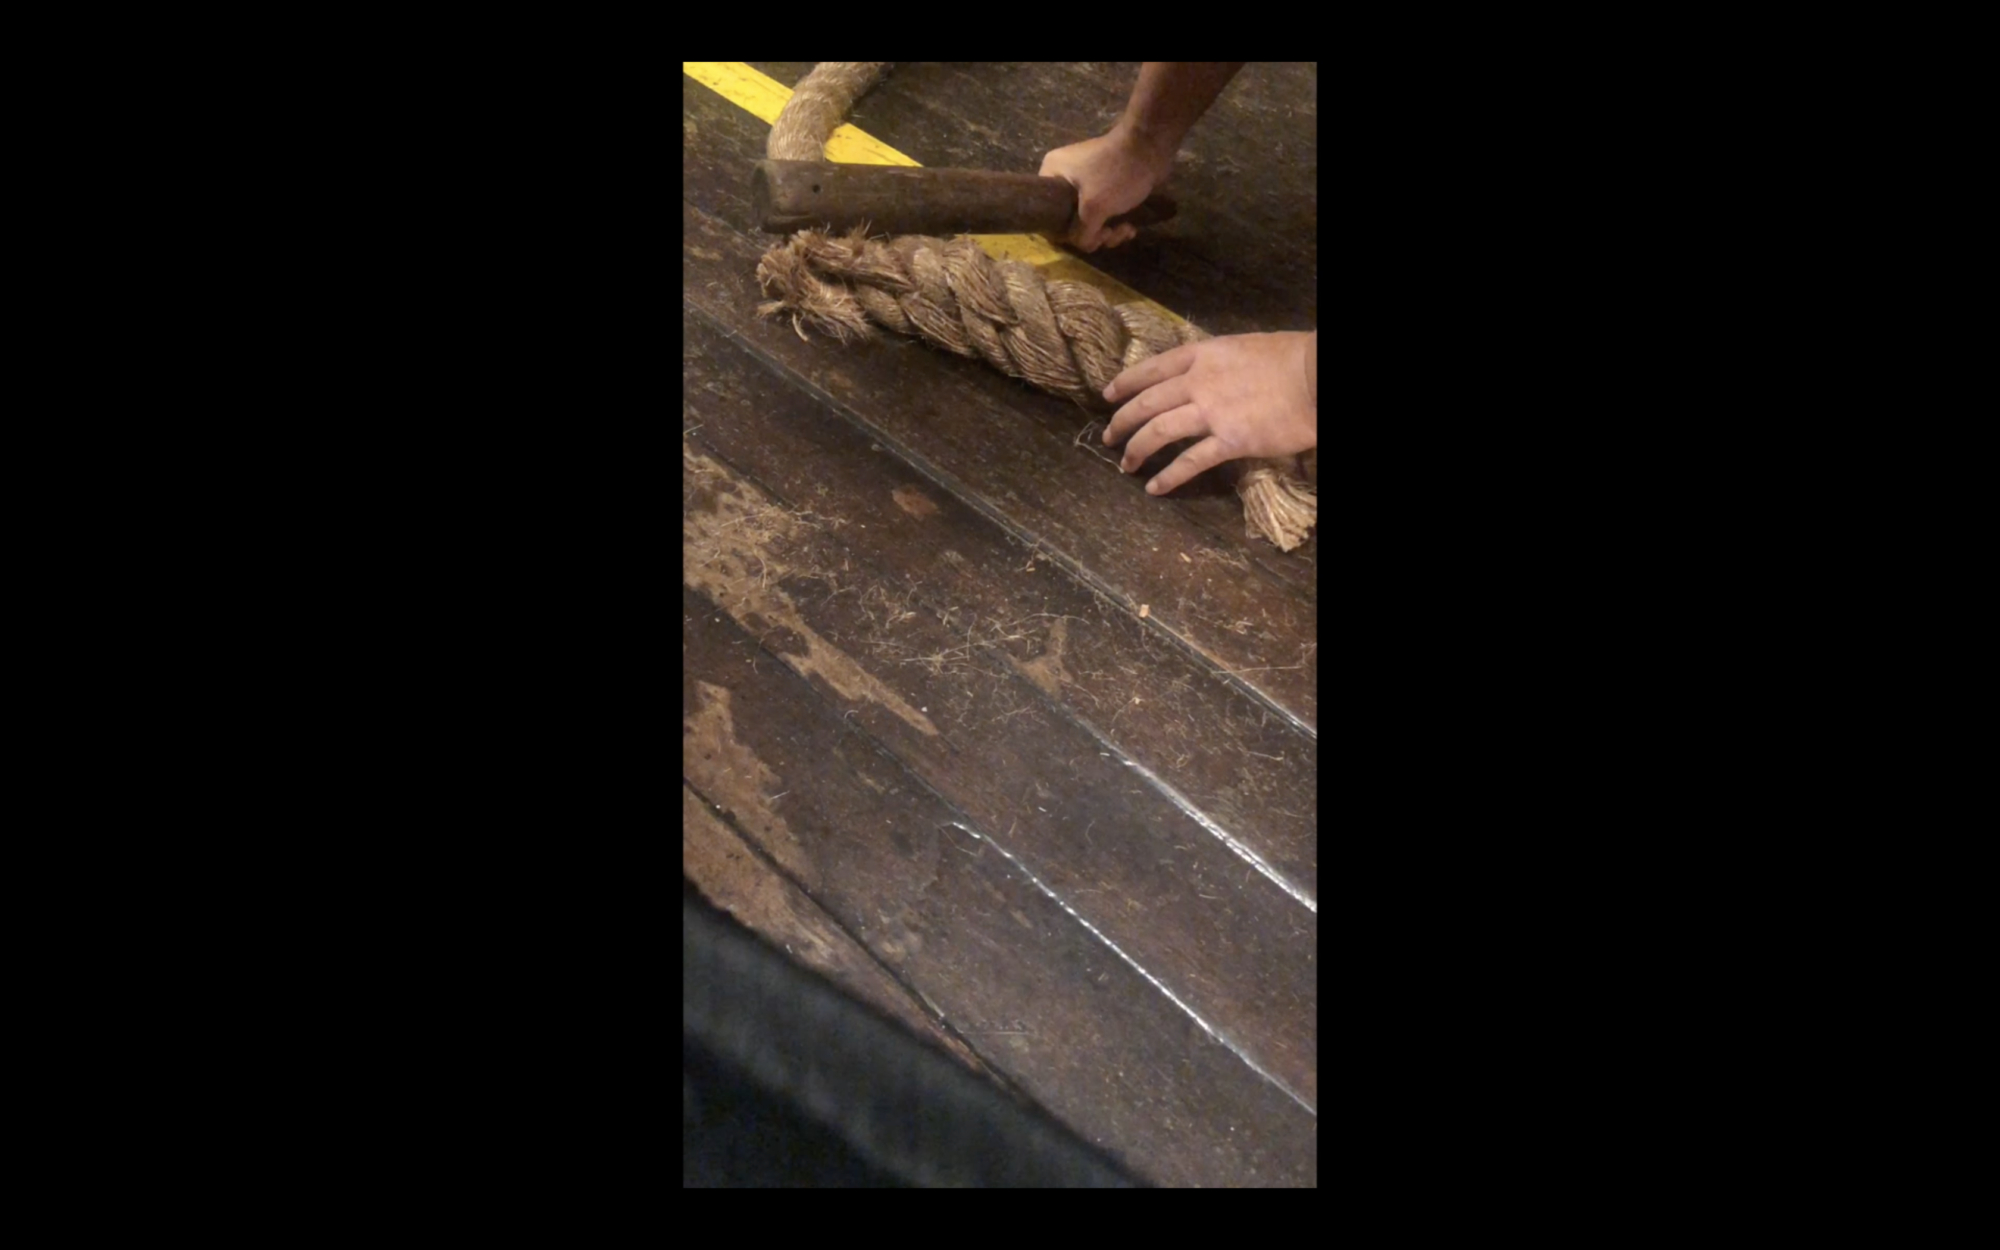 Video still of a pair of hands on a wooden floor handling a large piece of rope, and beating it with a wooden pallet.